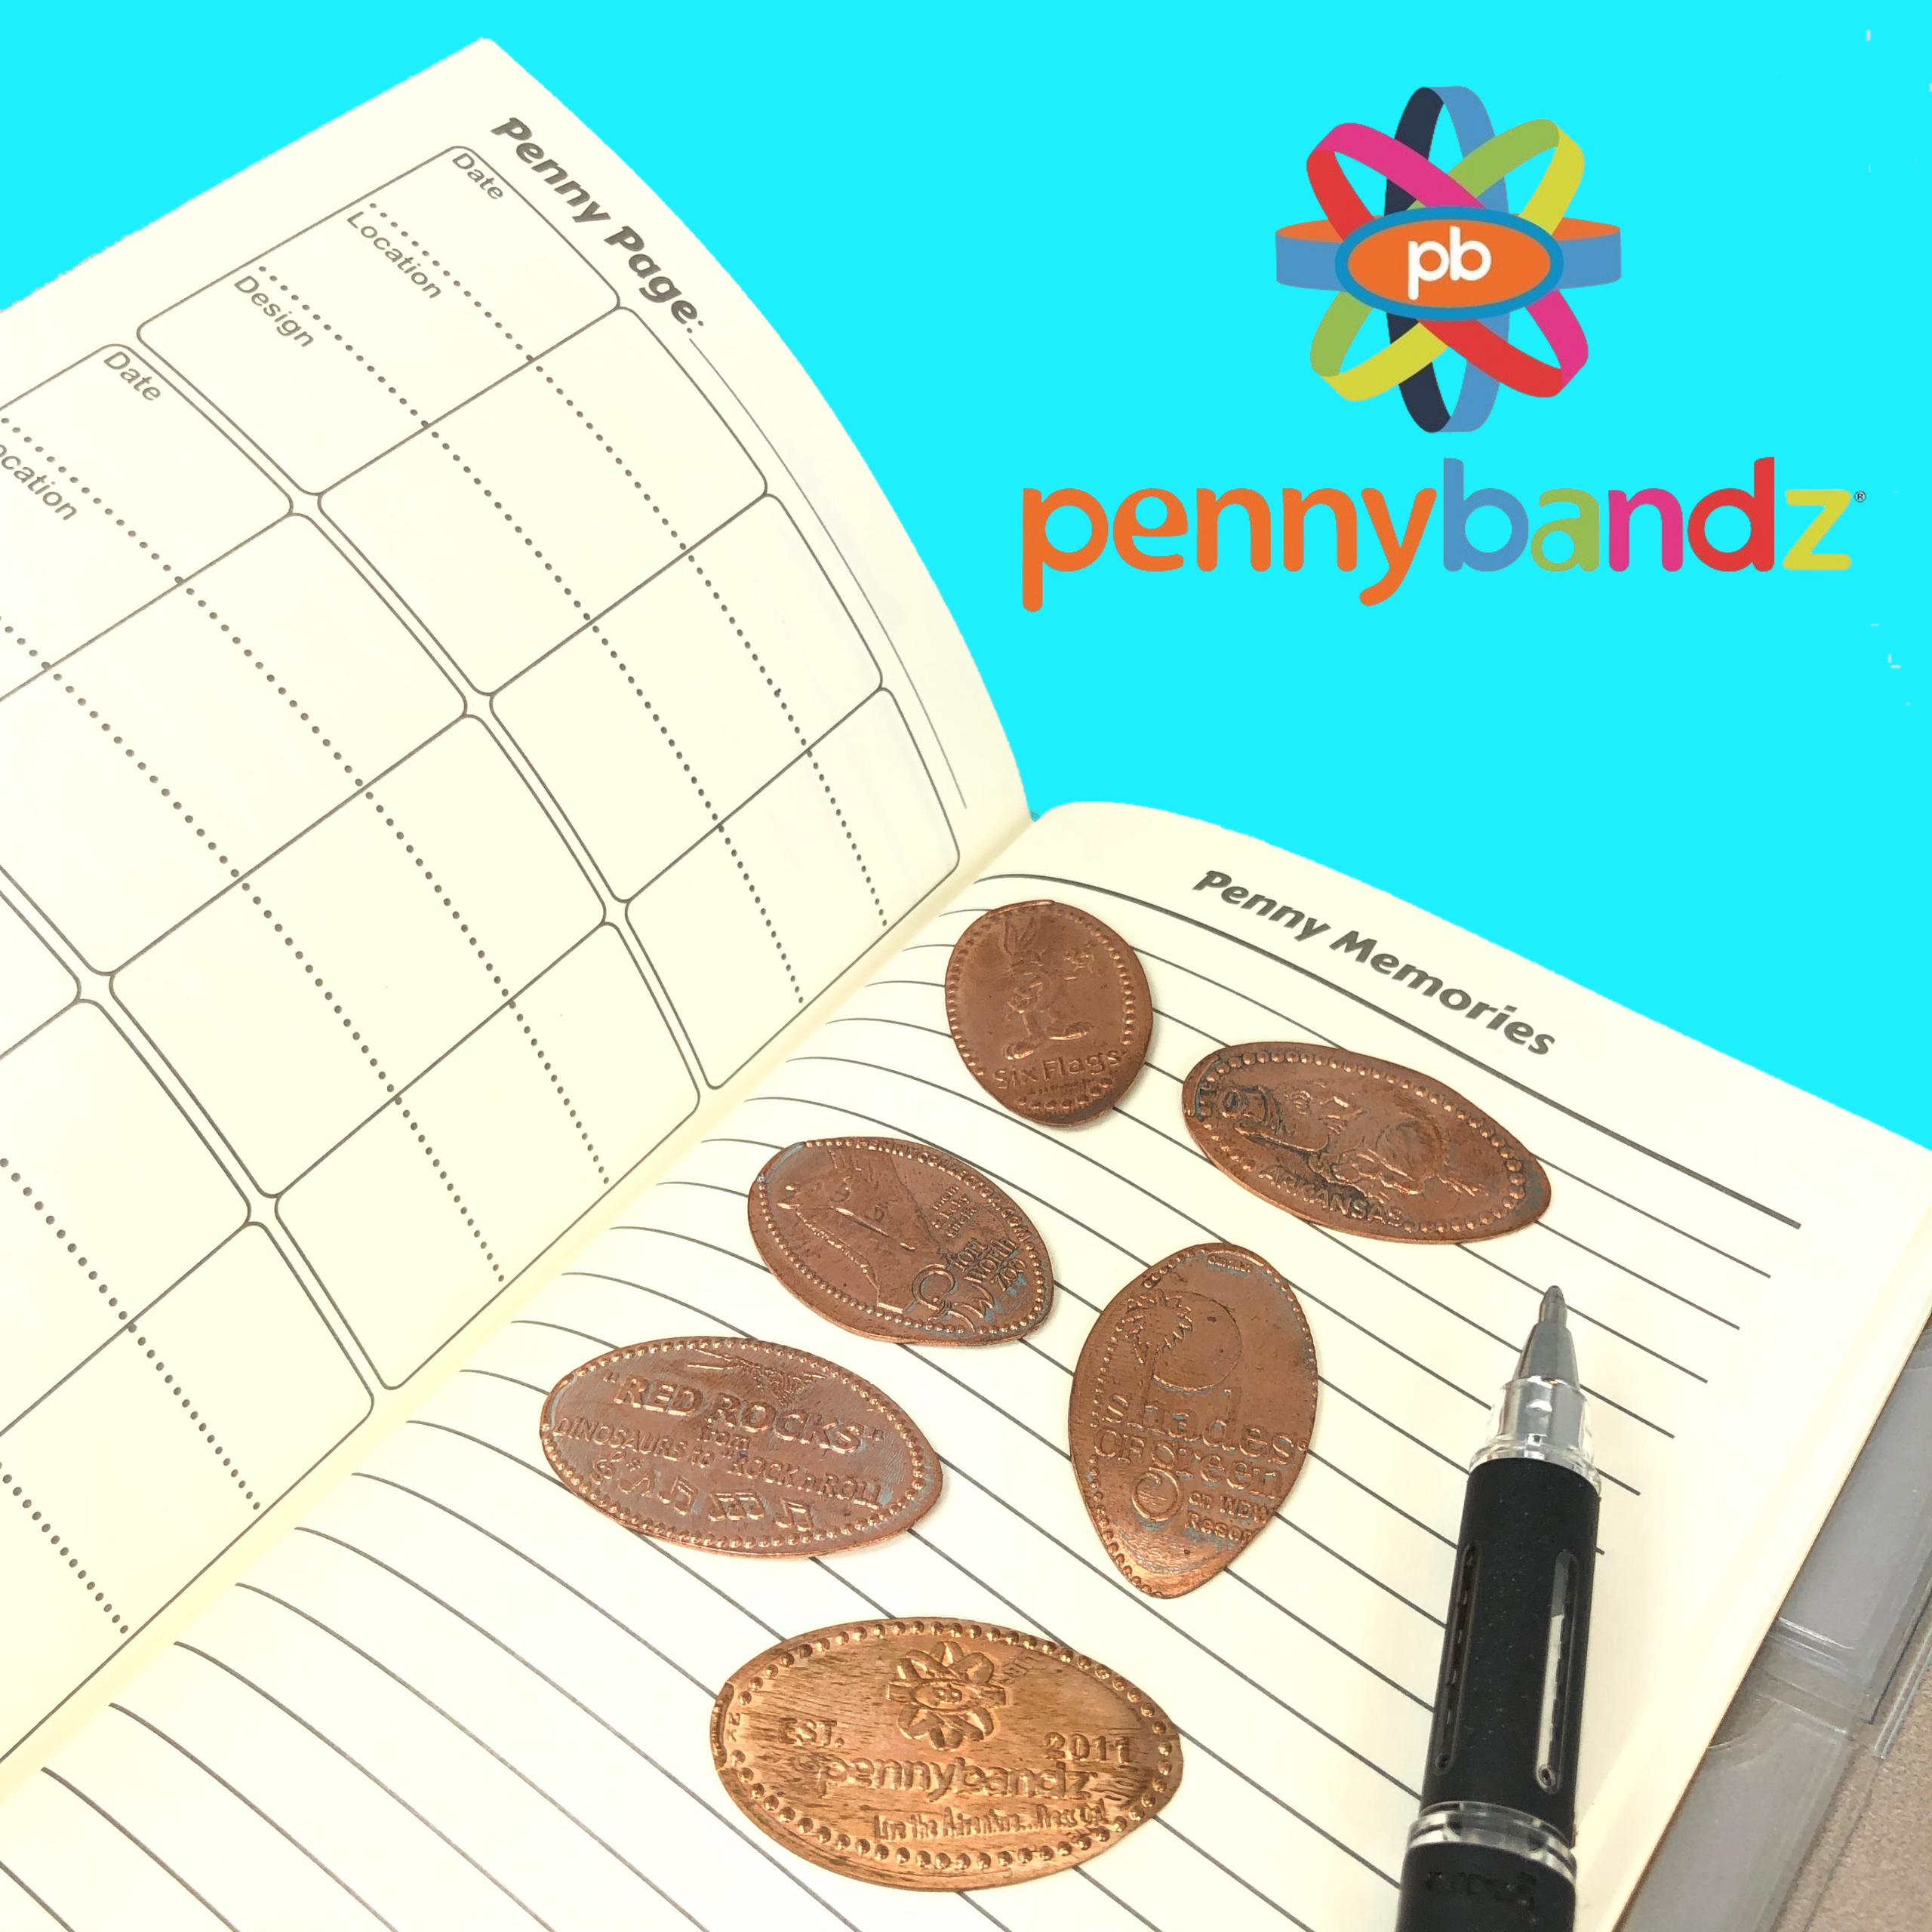 The Penny Journal by Pennybandz is the the Ultimate pressed penny